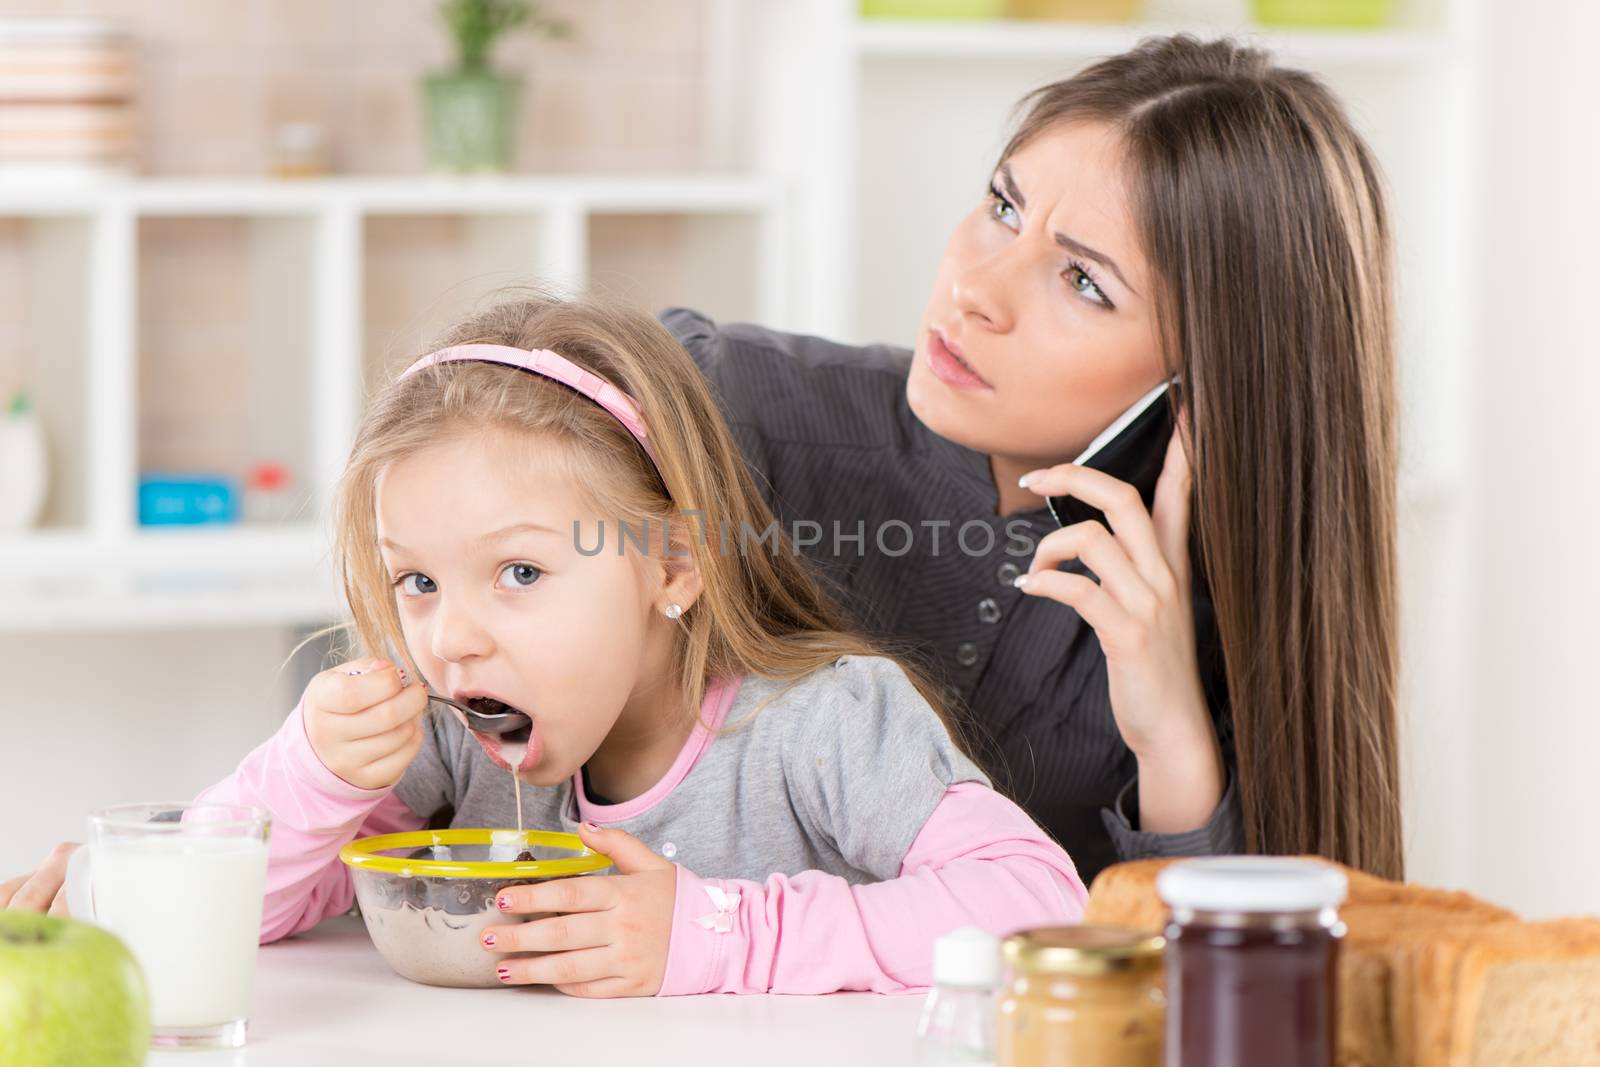 Overworked Business Woman and her little daughter in the morning. Overworked mother make phone calls before going to work. Daughter eating cereal with milk.